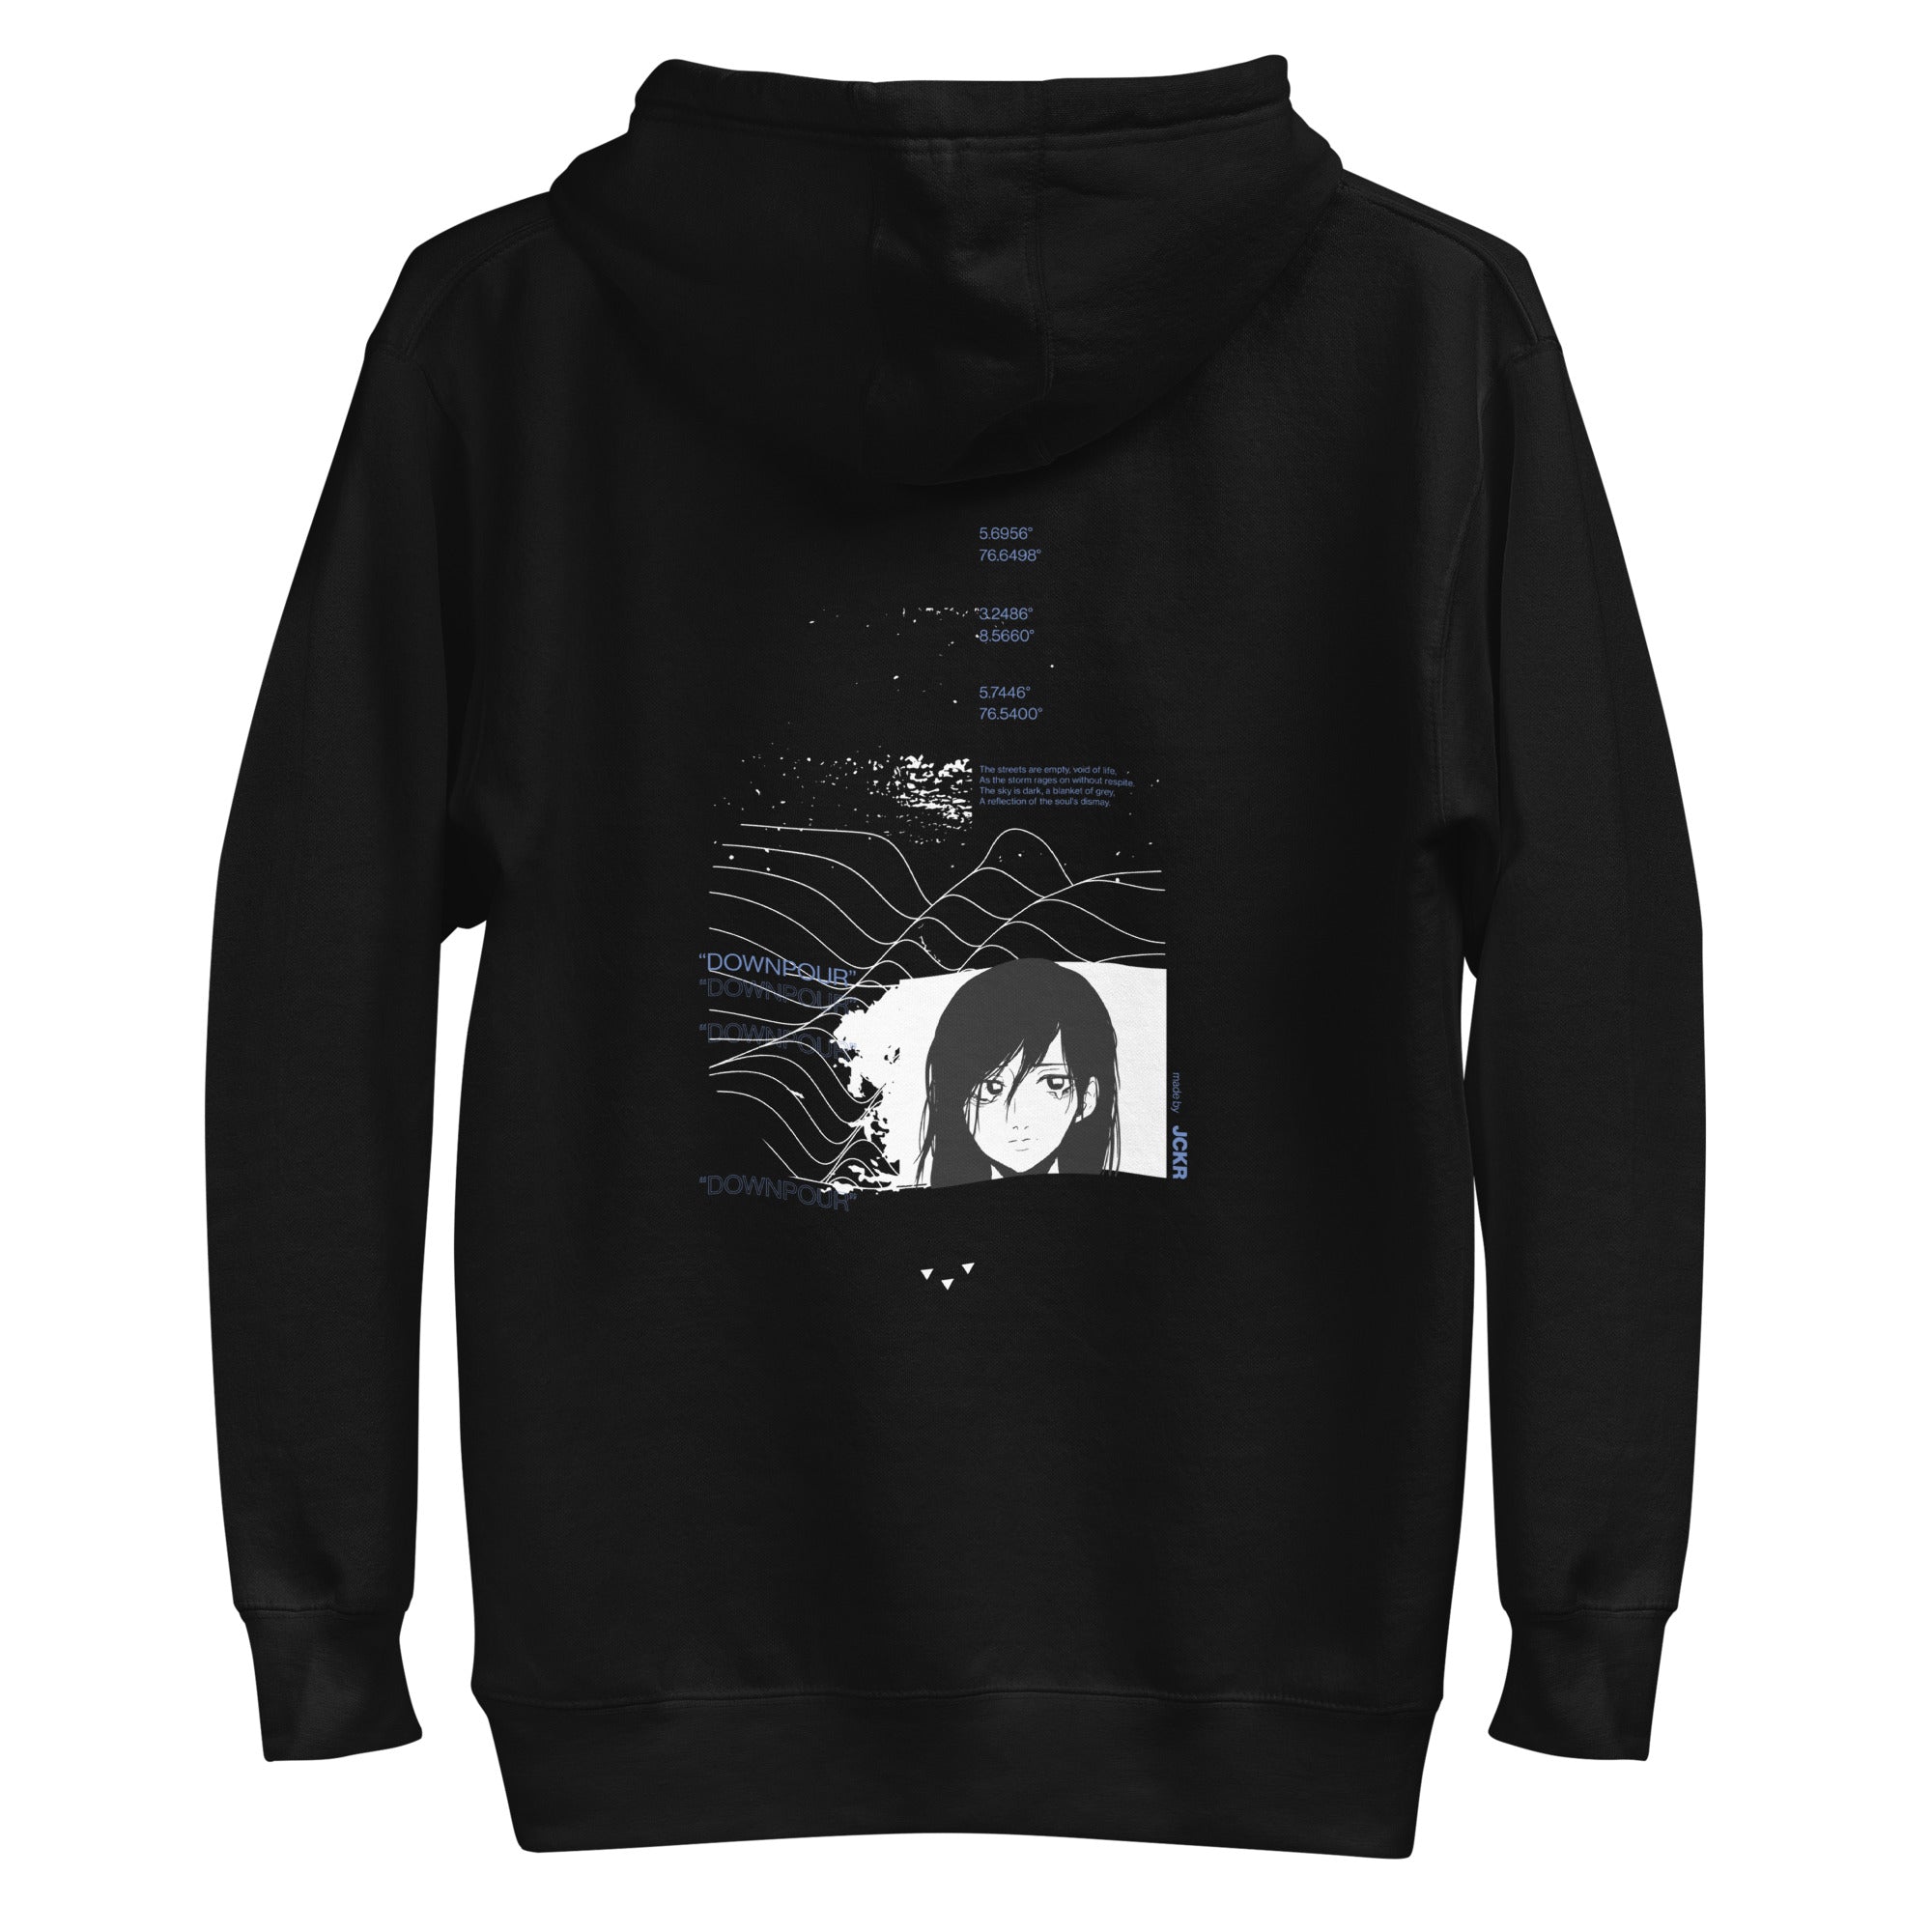 Downpour • anime hoodie - Jackler - anime-inspired streetwear - anime clothing